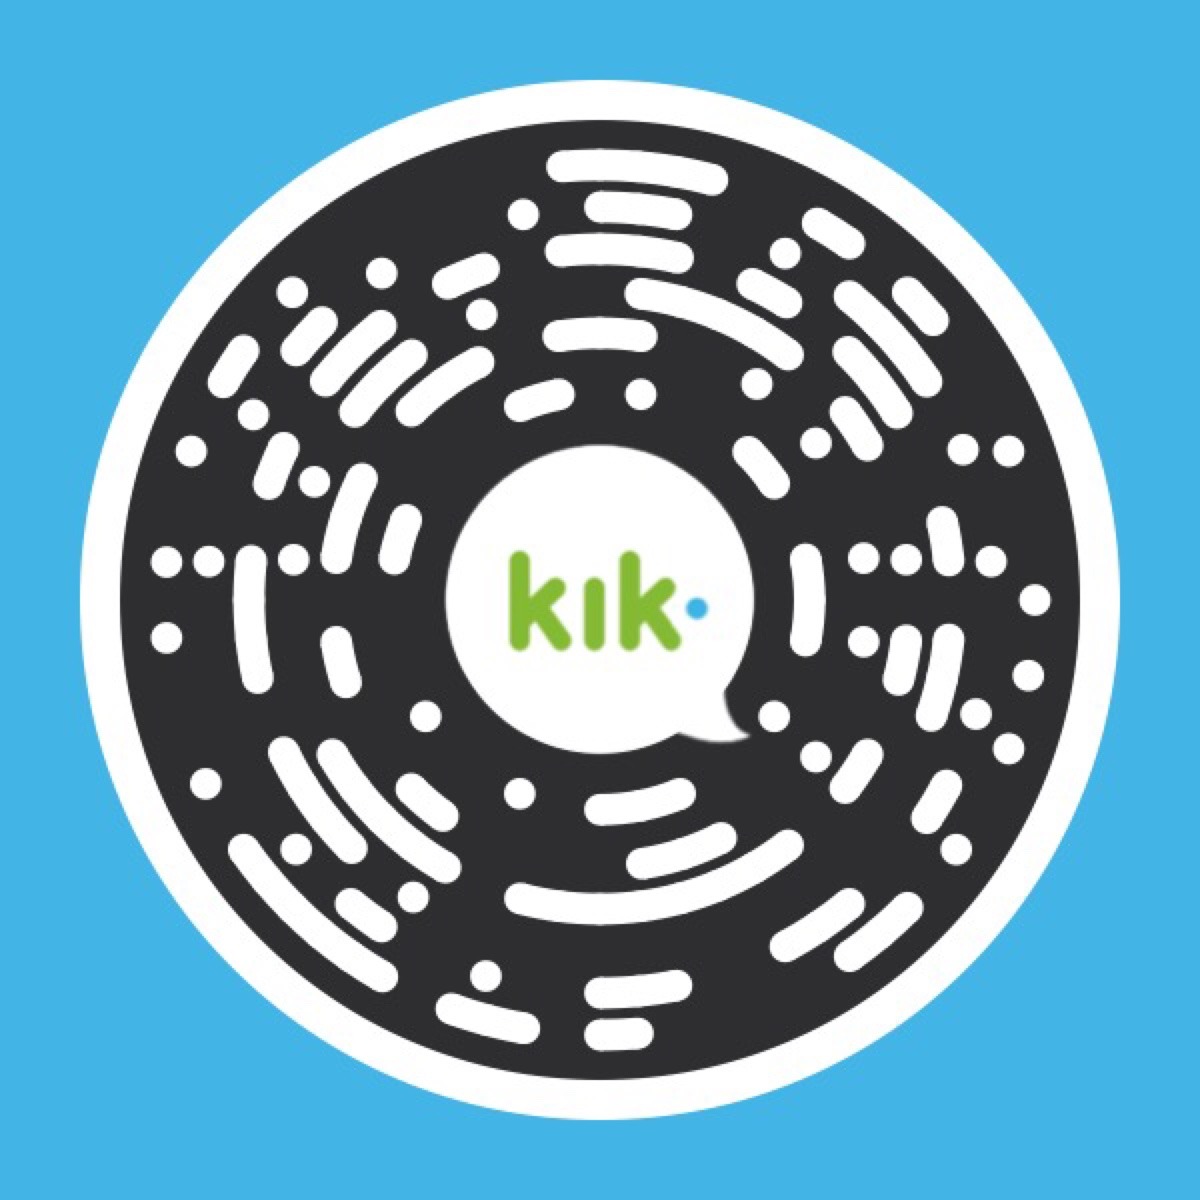 Hey readers,  If you have kik, join me in a chat for bullies, cheaters, and cucks